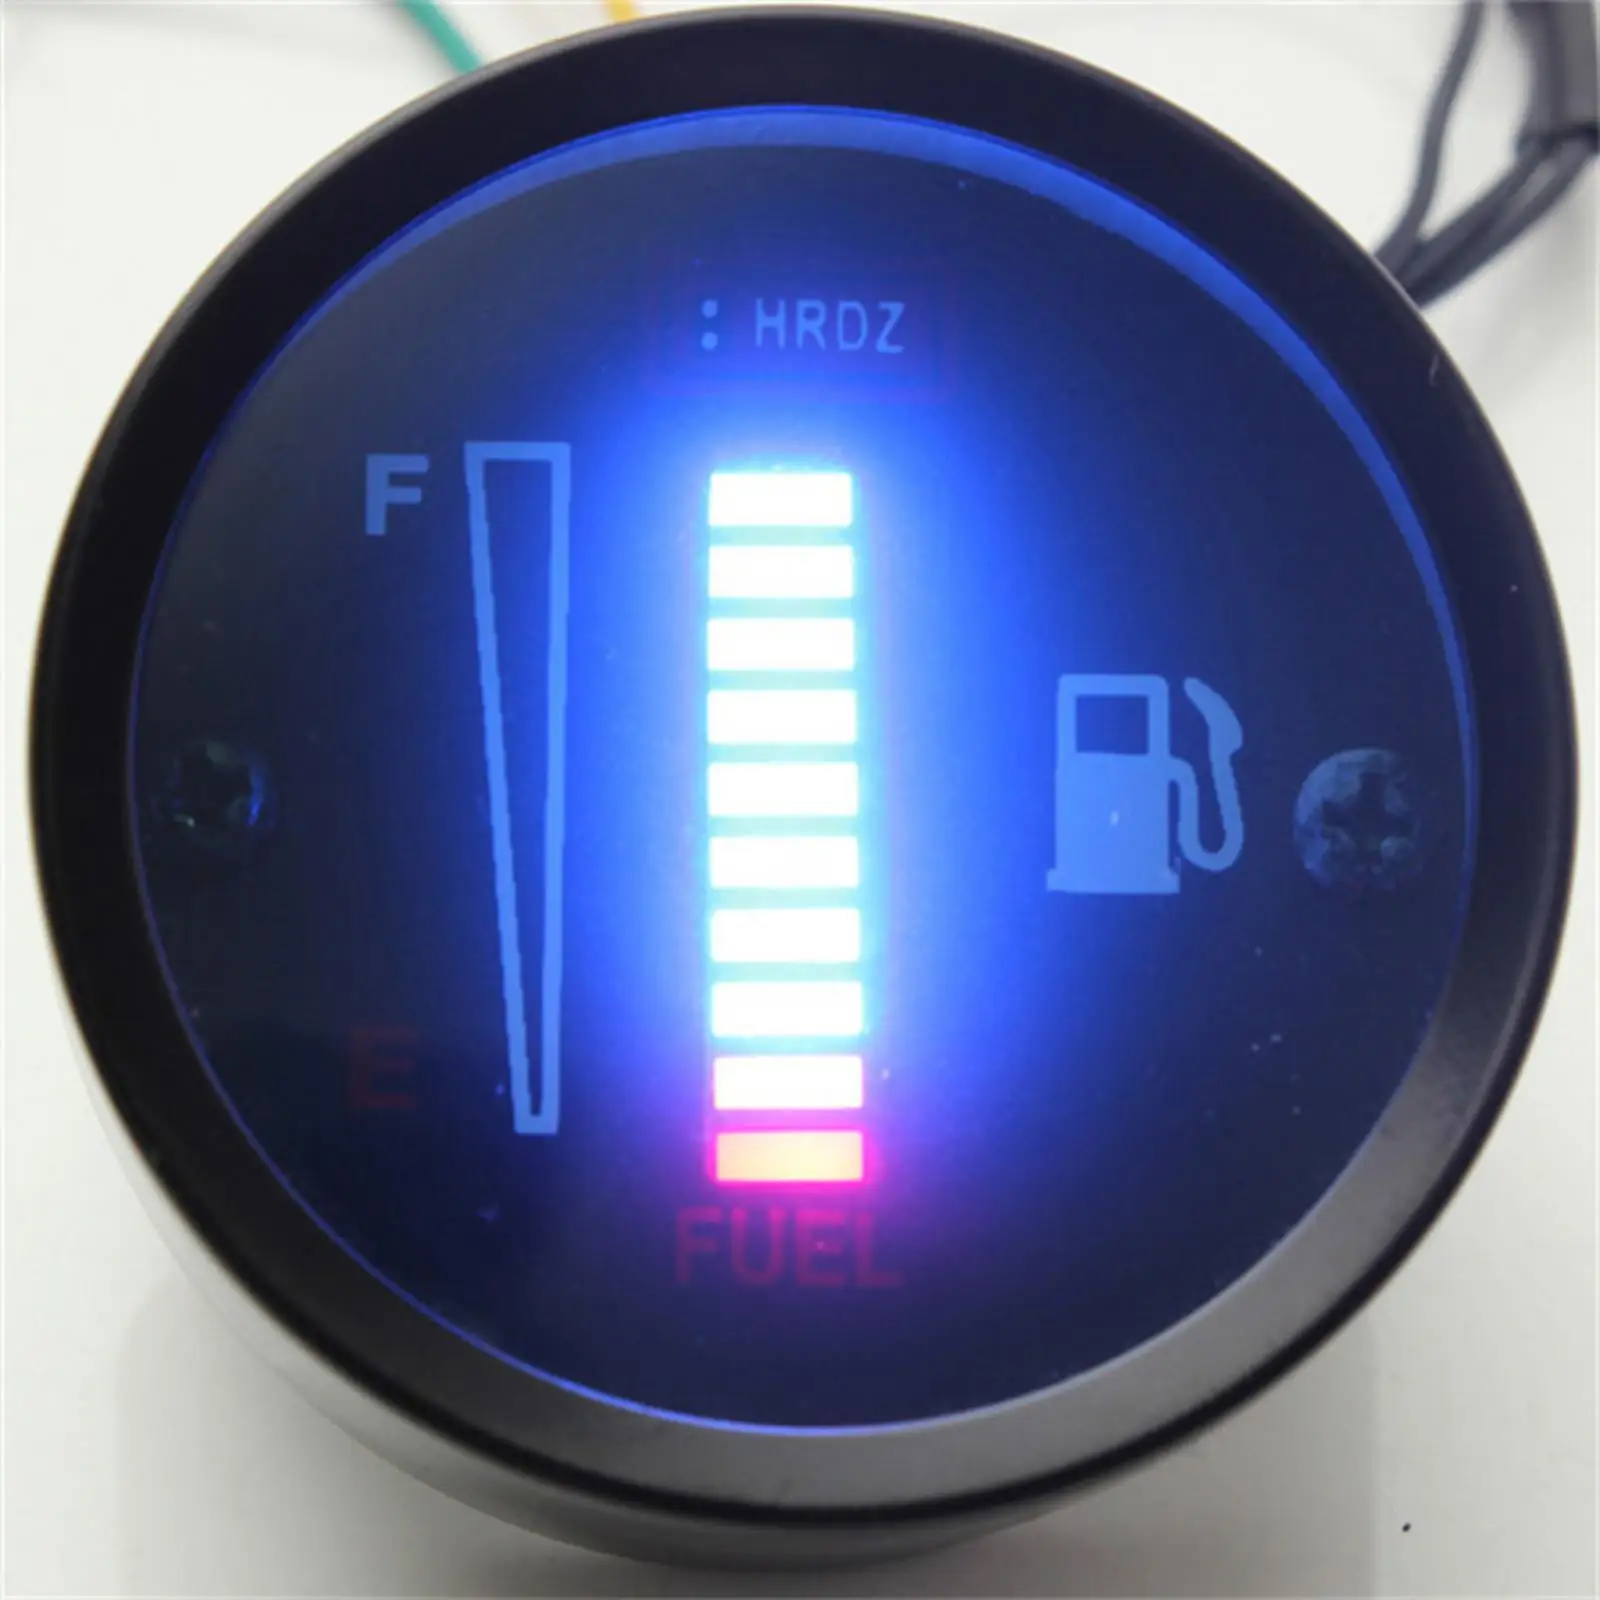 Car Motorcycle Fuel Level Display Gauge Vehicles Replacement LED Display